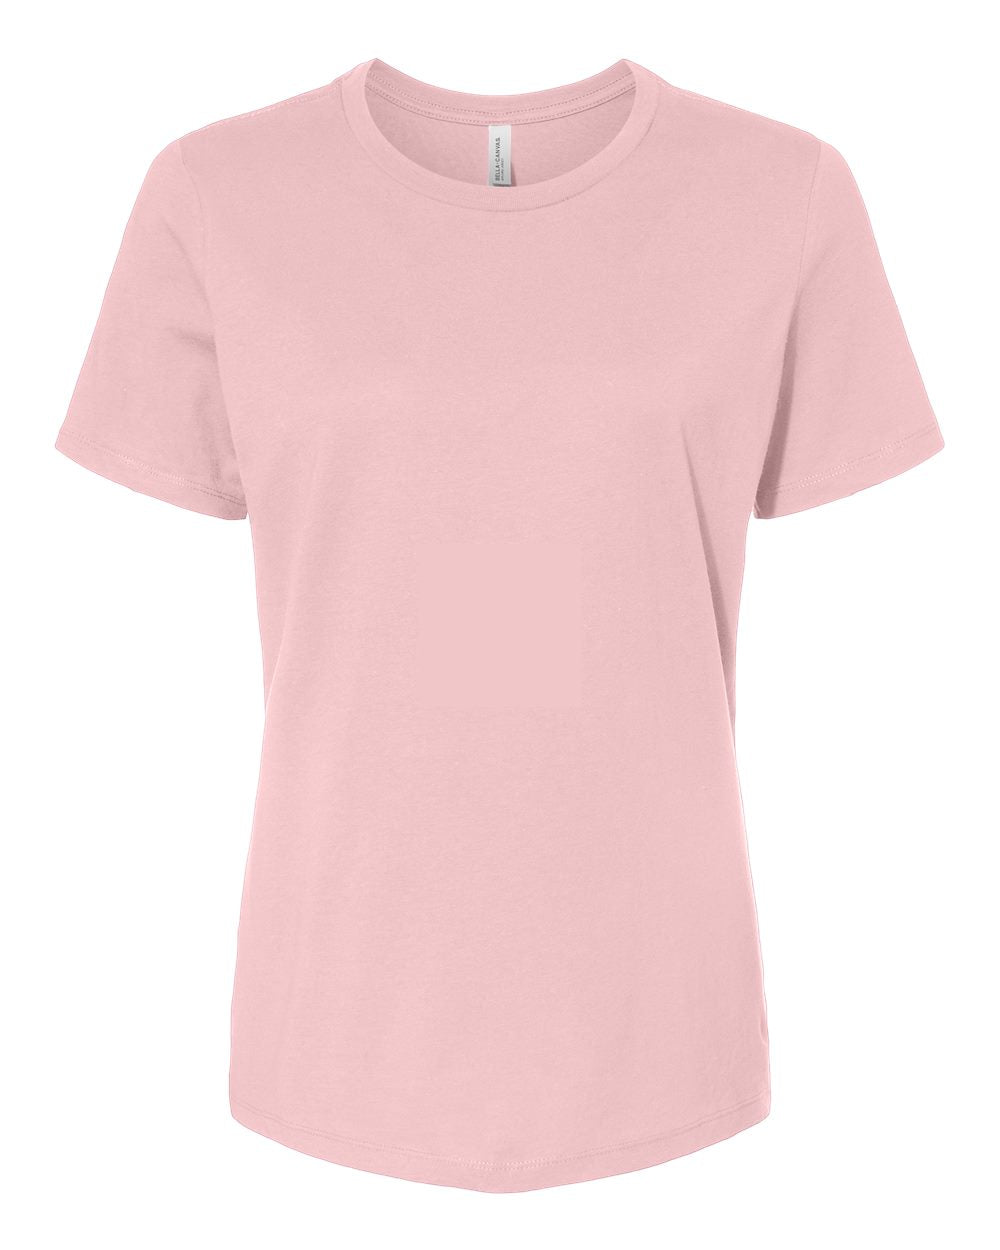 bella+canvas womens relaxed tee pink